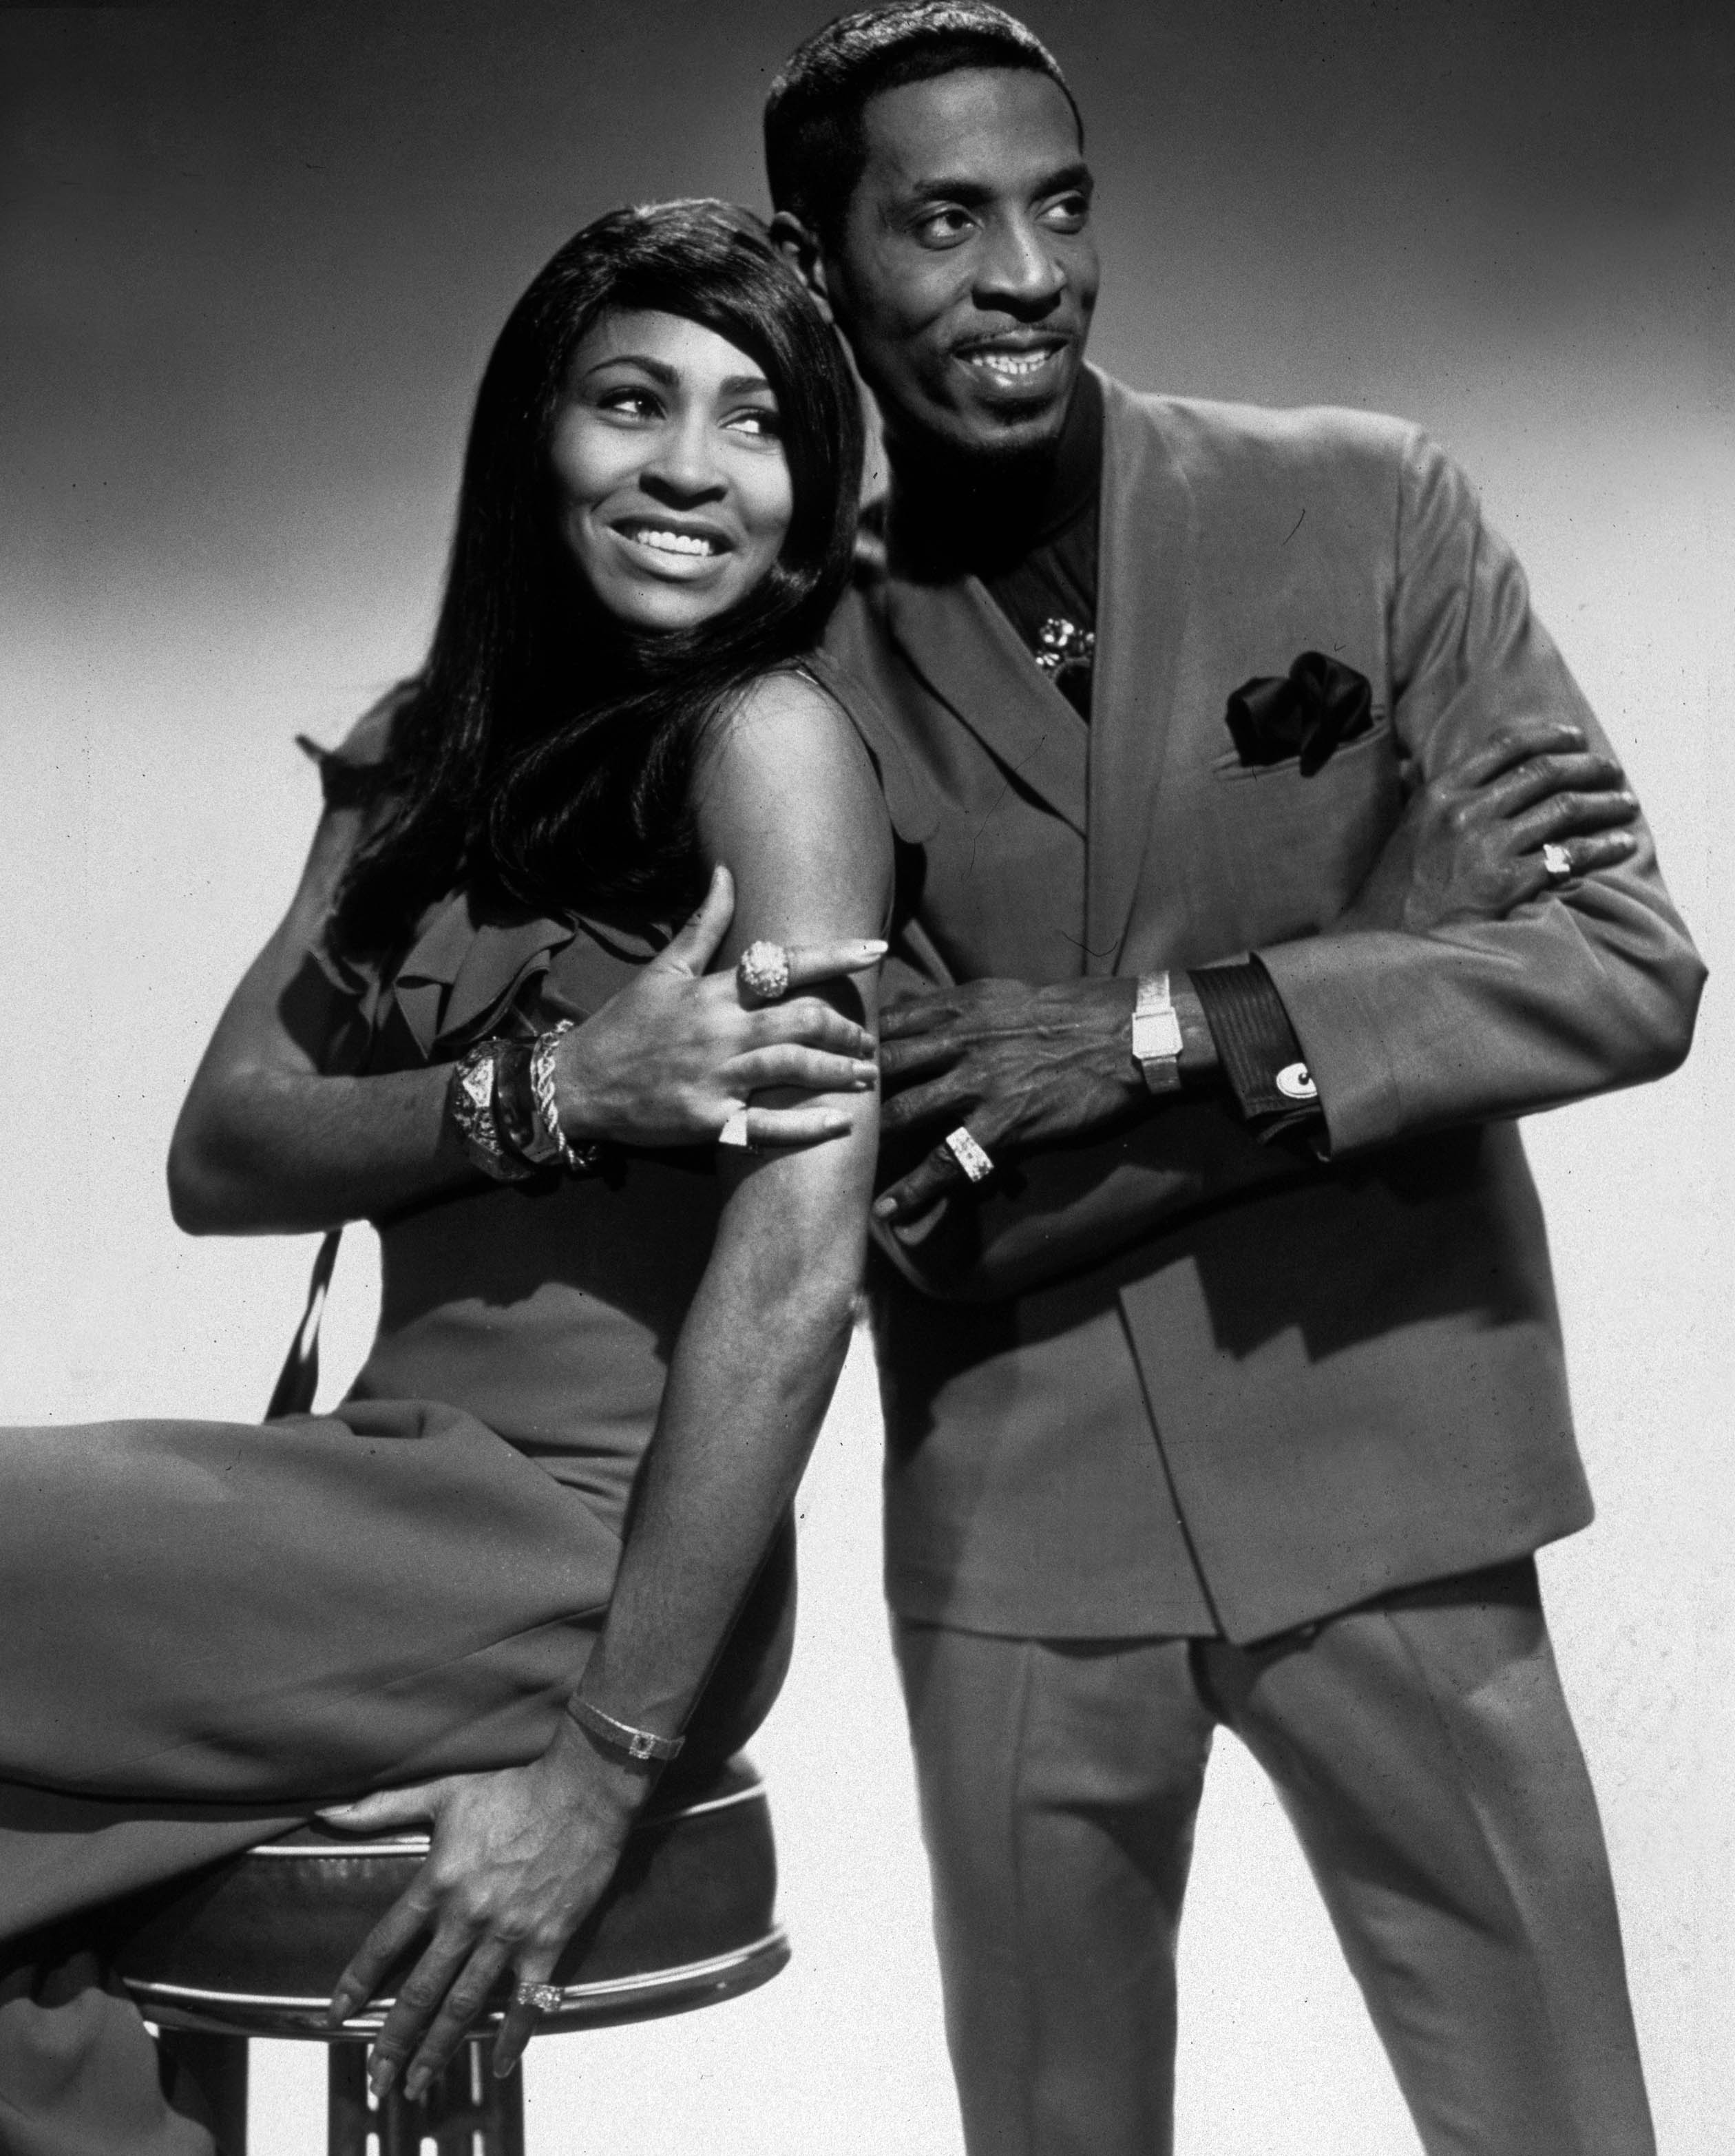 Ike Turner and his wife Tina Turner in 1965. | Source: Getty Images.